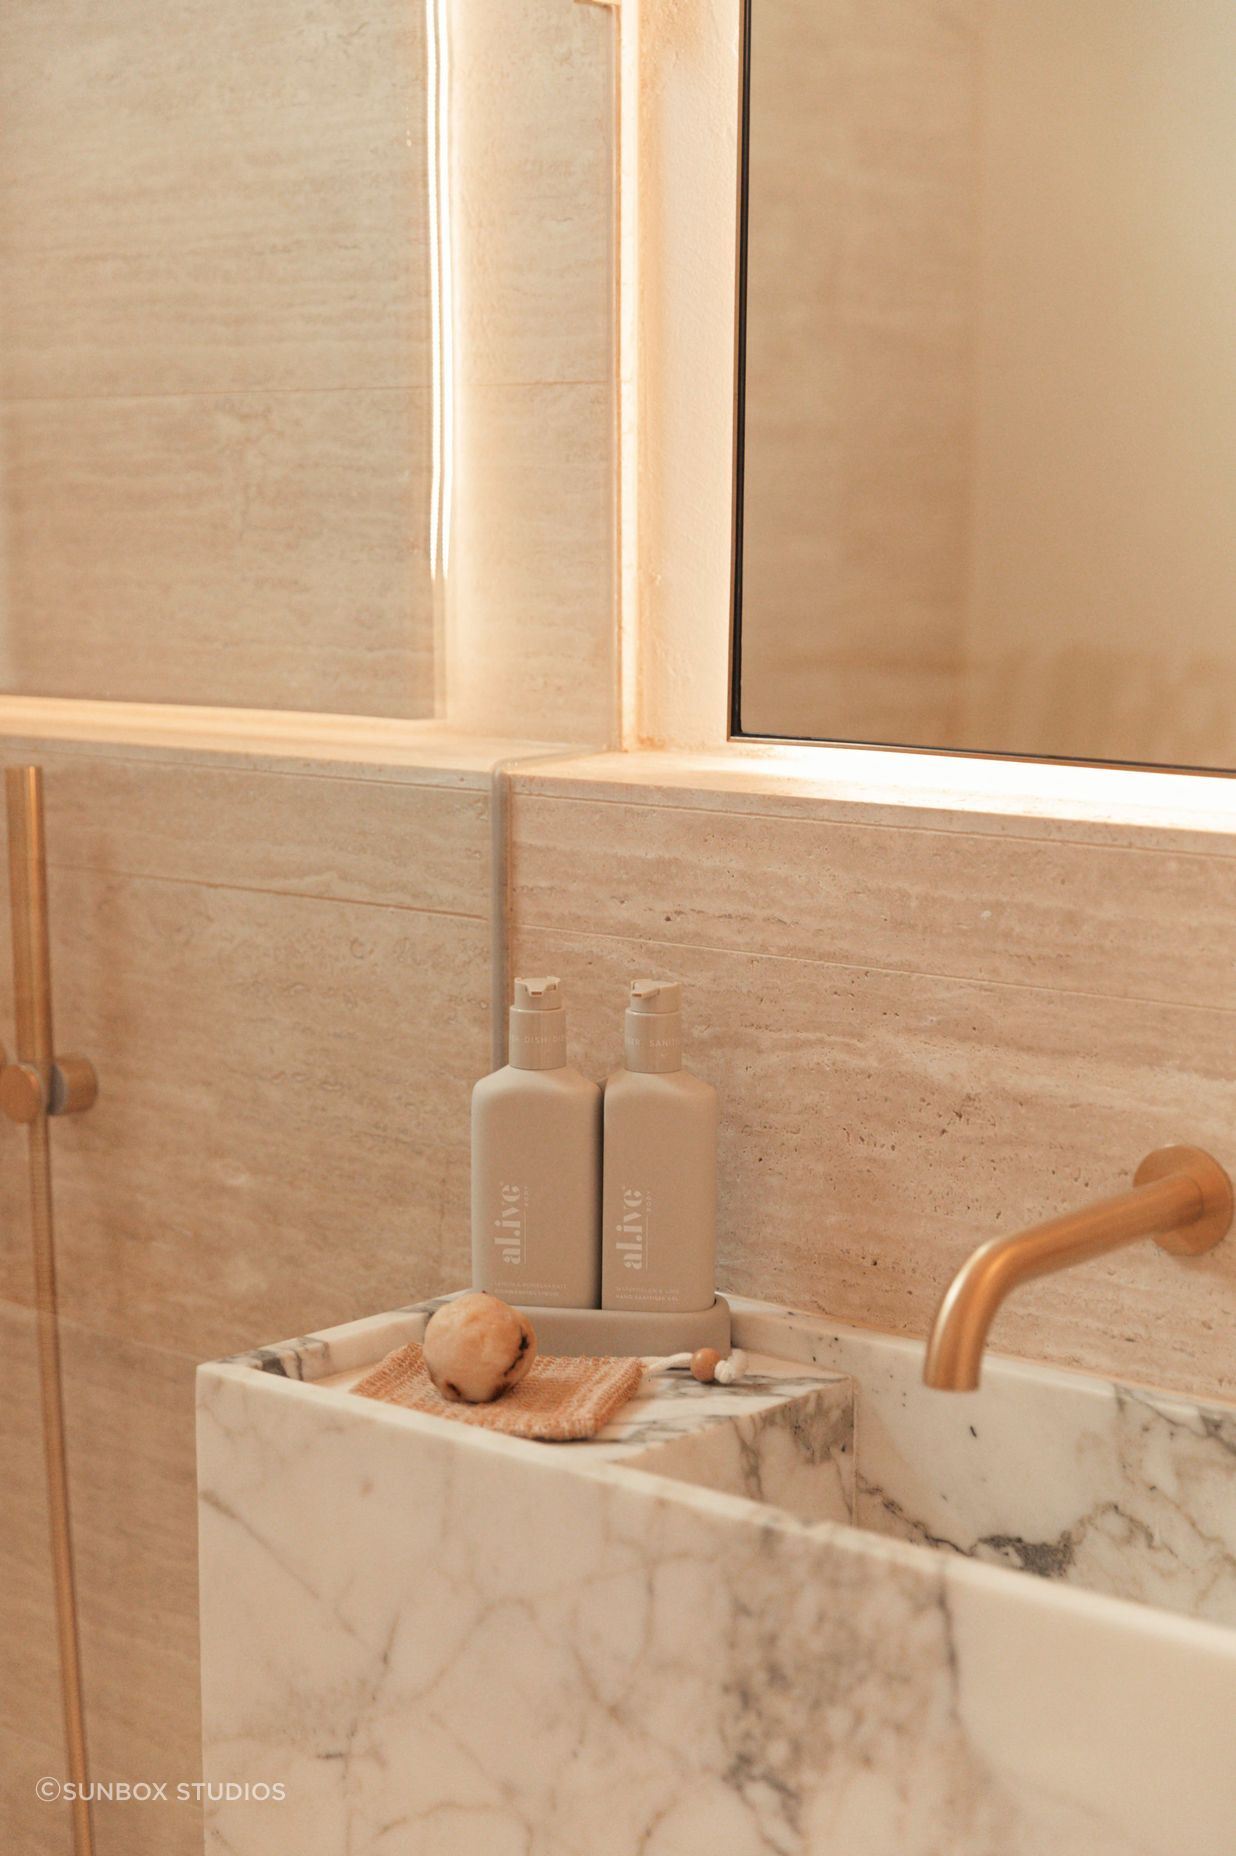 In the bathroom, a bespoke stone basin is the ultimate in luxury.